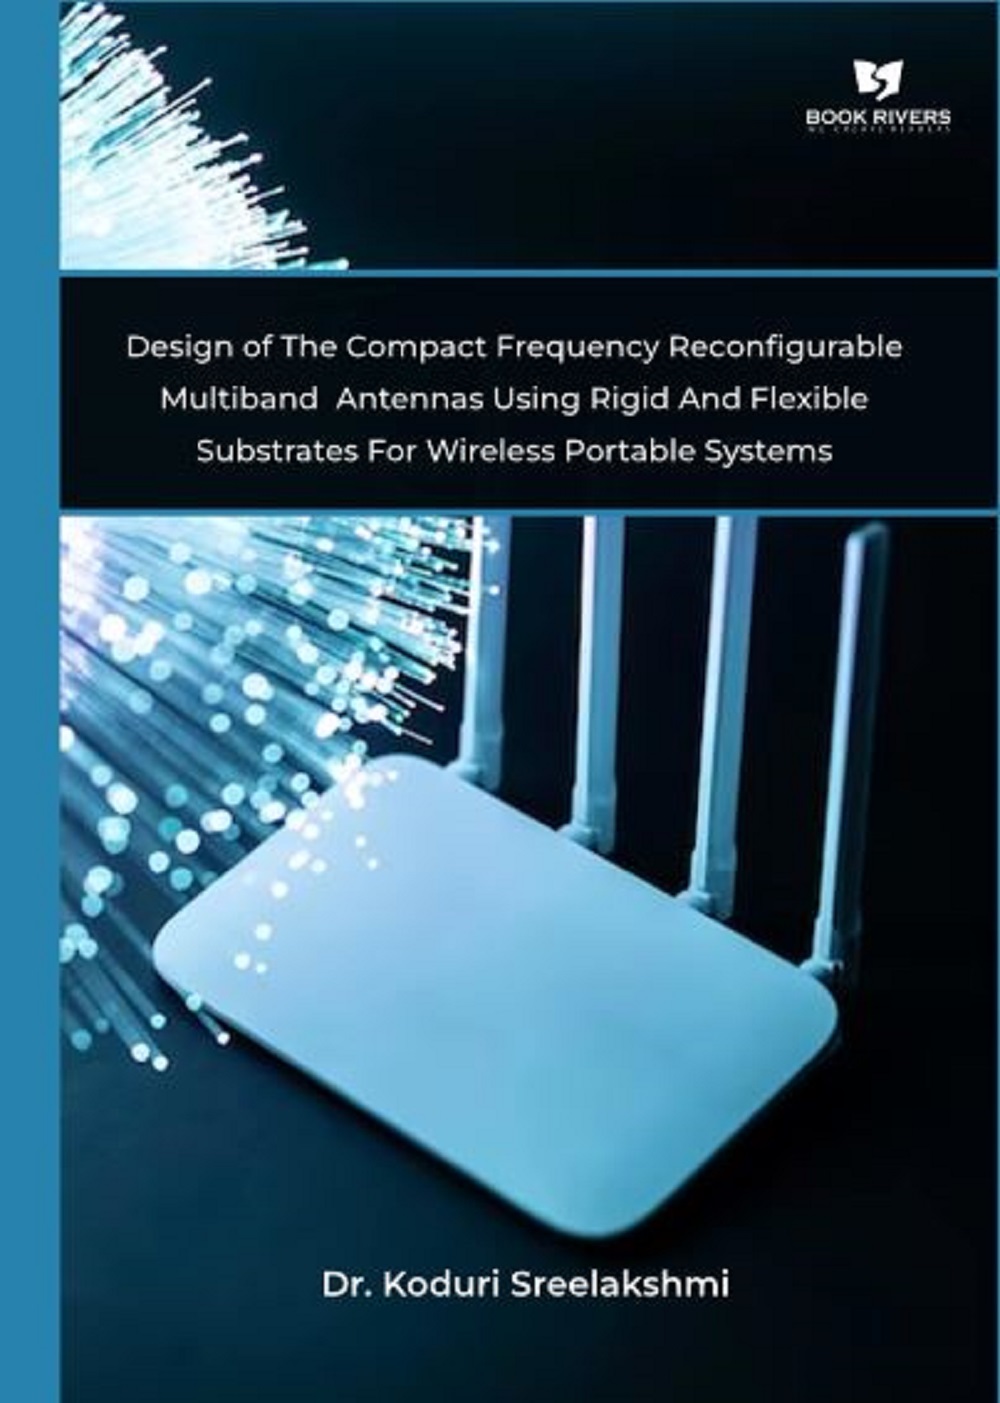 Design of The Compact Frequency Reconfigurable Multiband Antennas Using Rigid And Flexible Substrates For Wireless Portable Systems